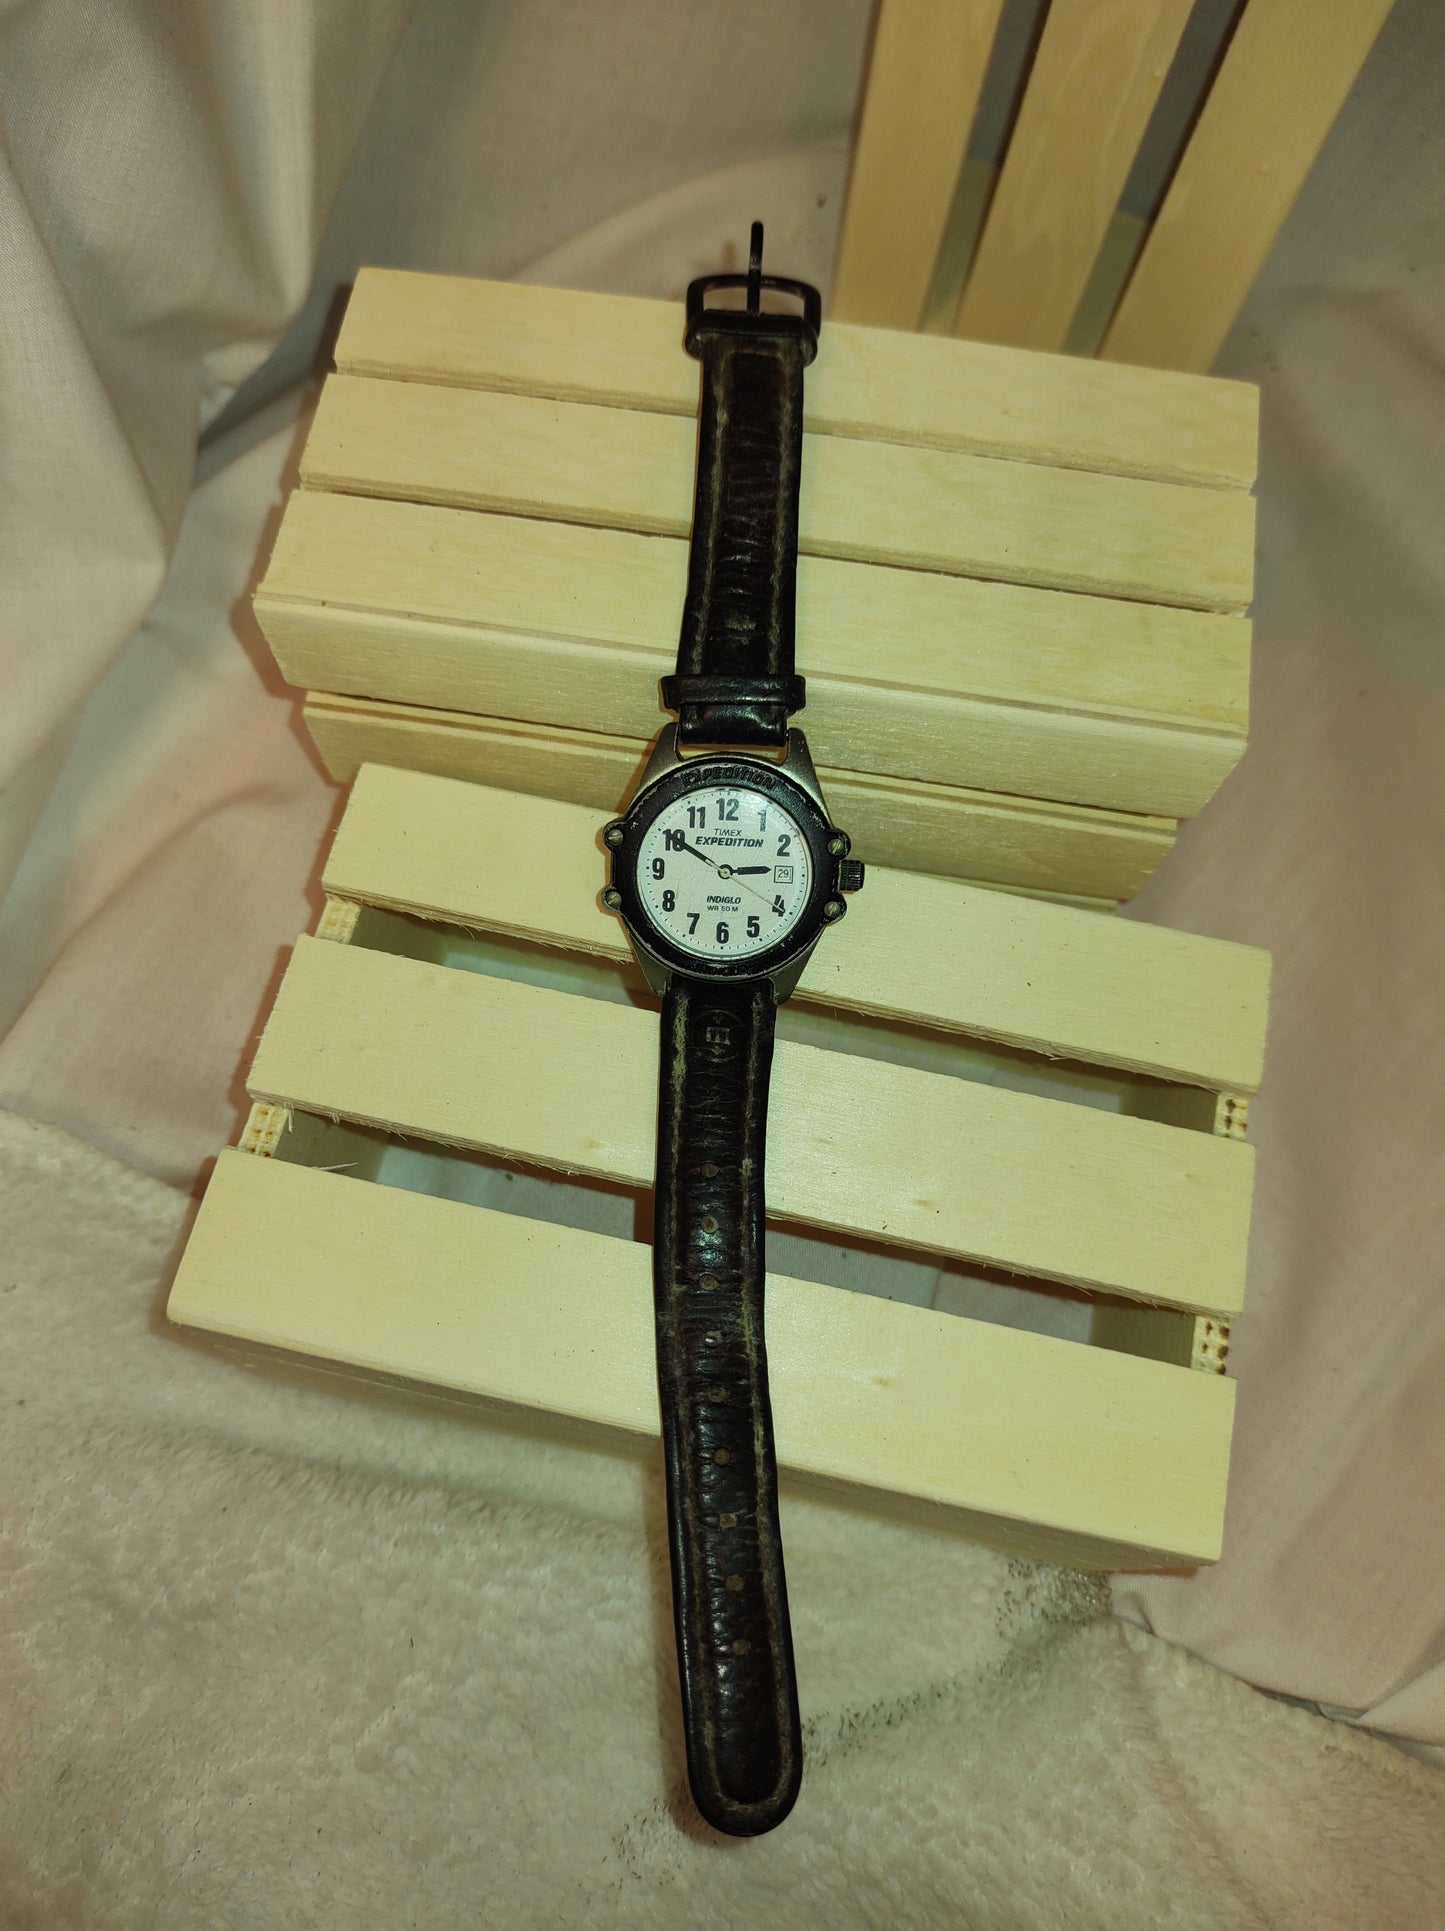 Pre-owned Timex Expedition Indgol ladies watch sign of wear ..whit dial that lights up when you push the  run well